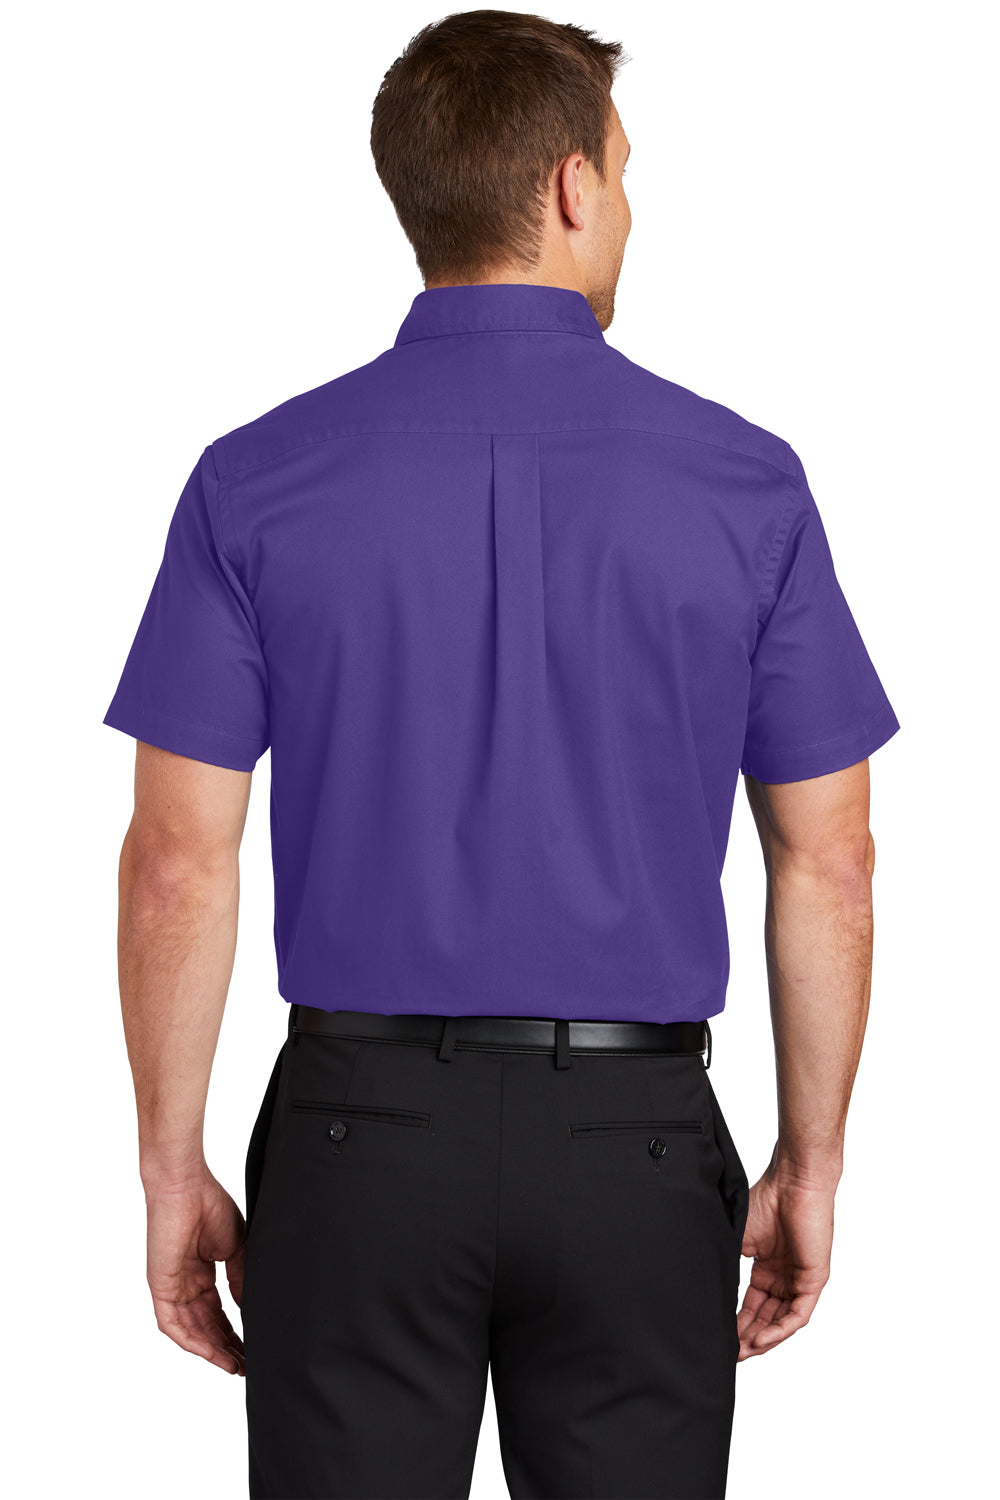 Port Authority S508/TLS508 Mens Easy Care Wrinkle Resistant Short Sleeve Button Down Shirt w/ Pocket Purple Back